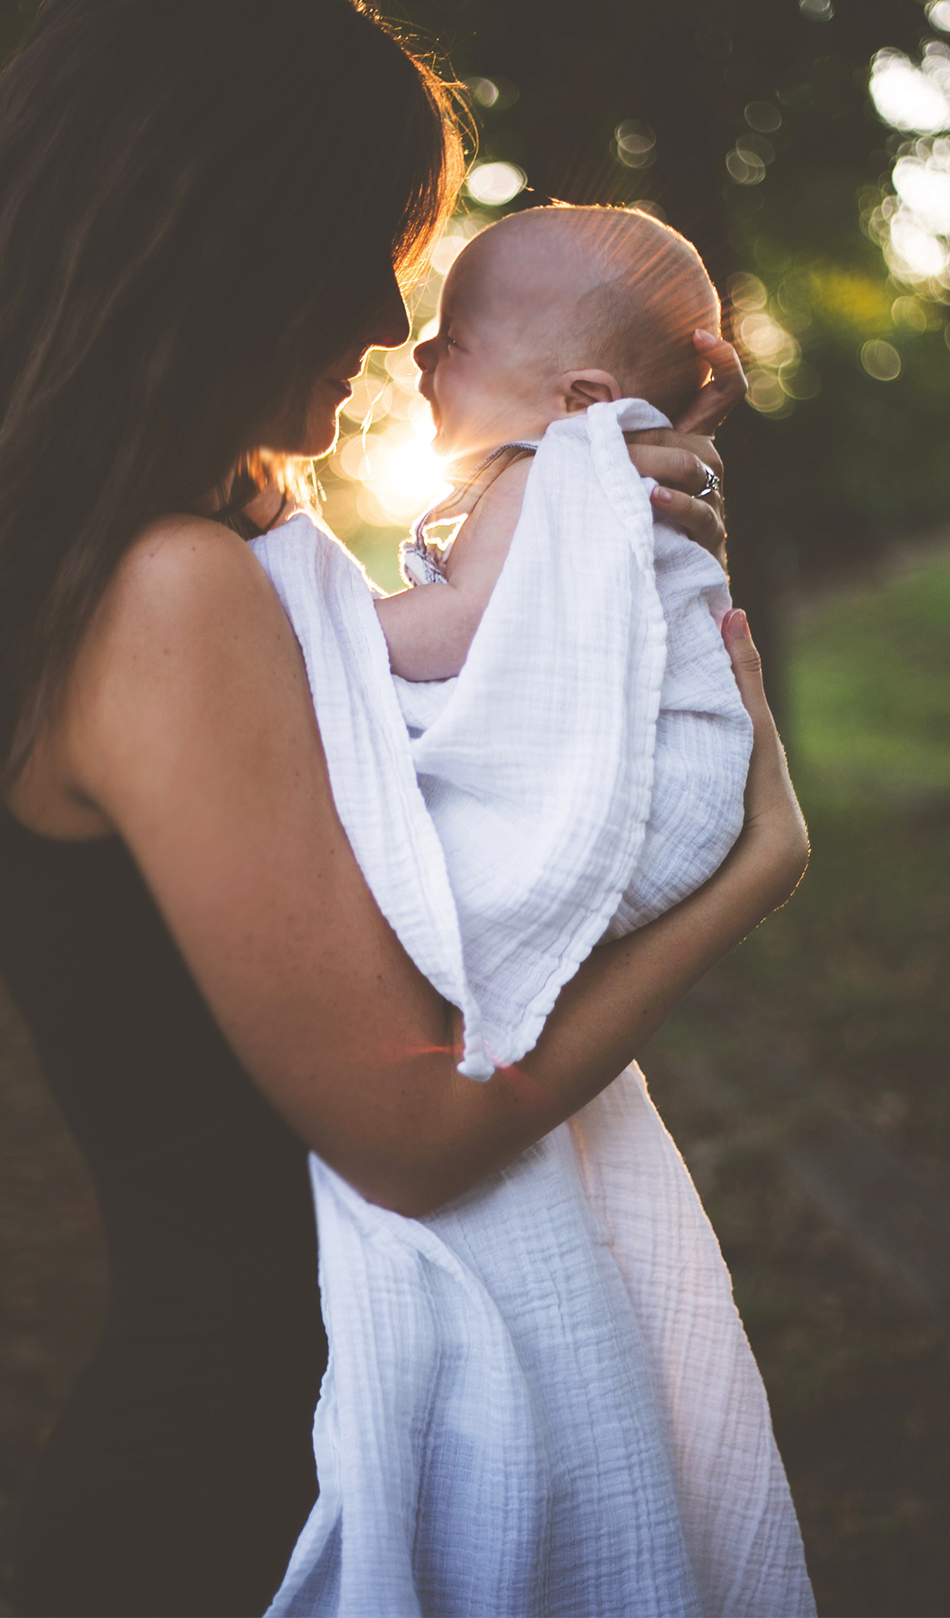 Woman holding baby and thinking about her fertility 